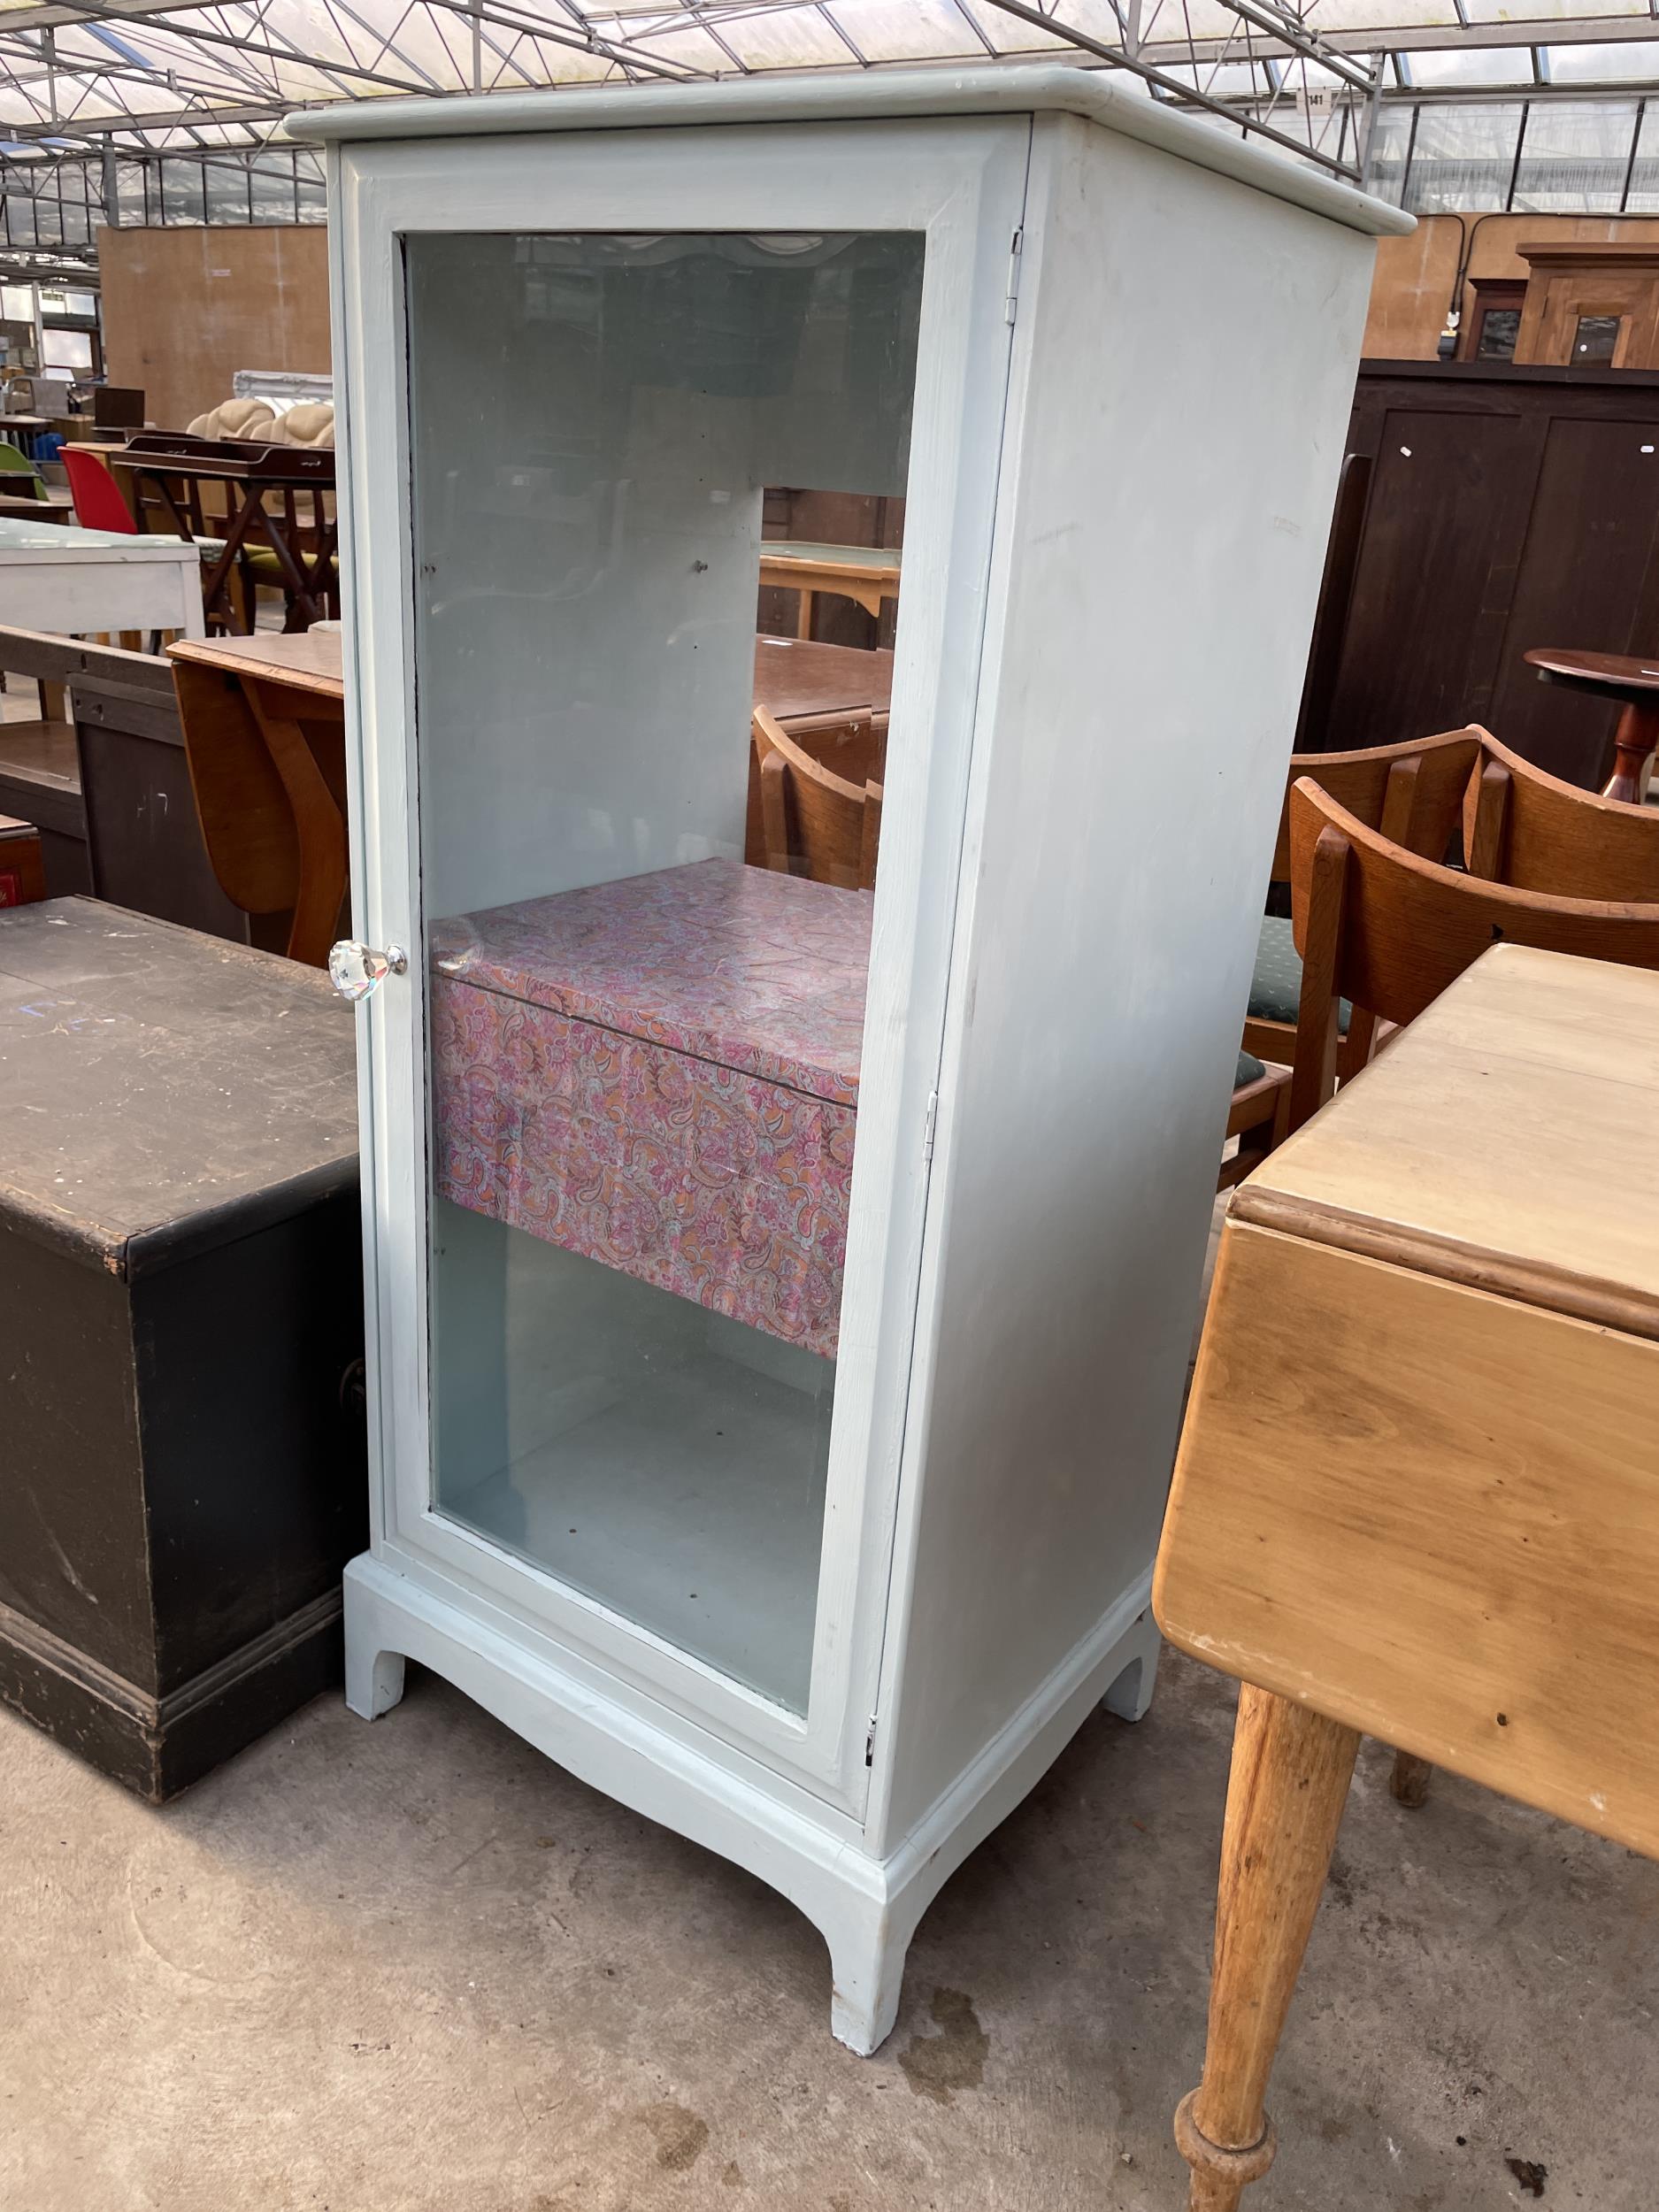 A PALE BLUE PAINTED GLASS FRONTED CABINET - Image 2 of 3